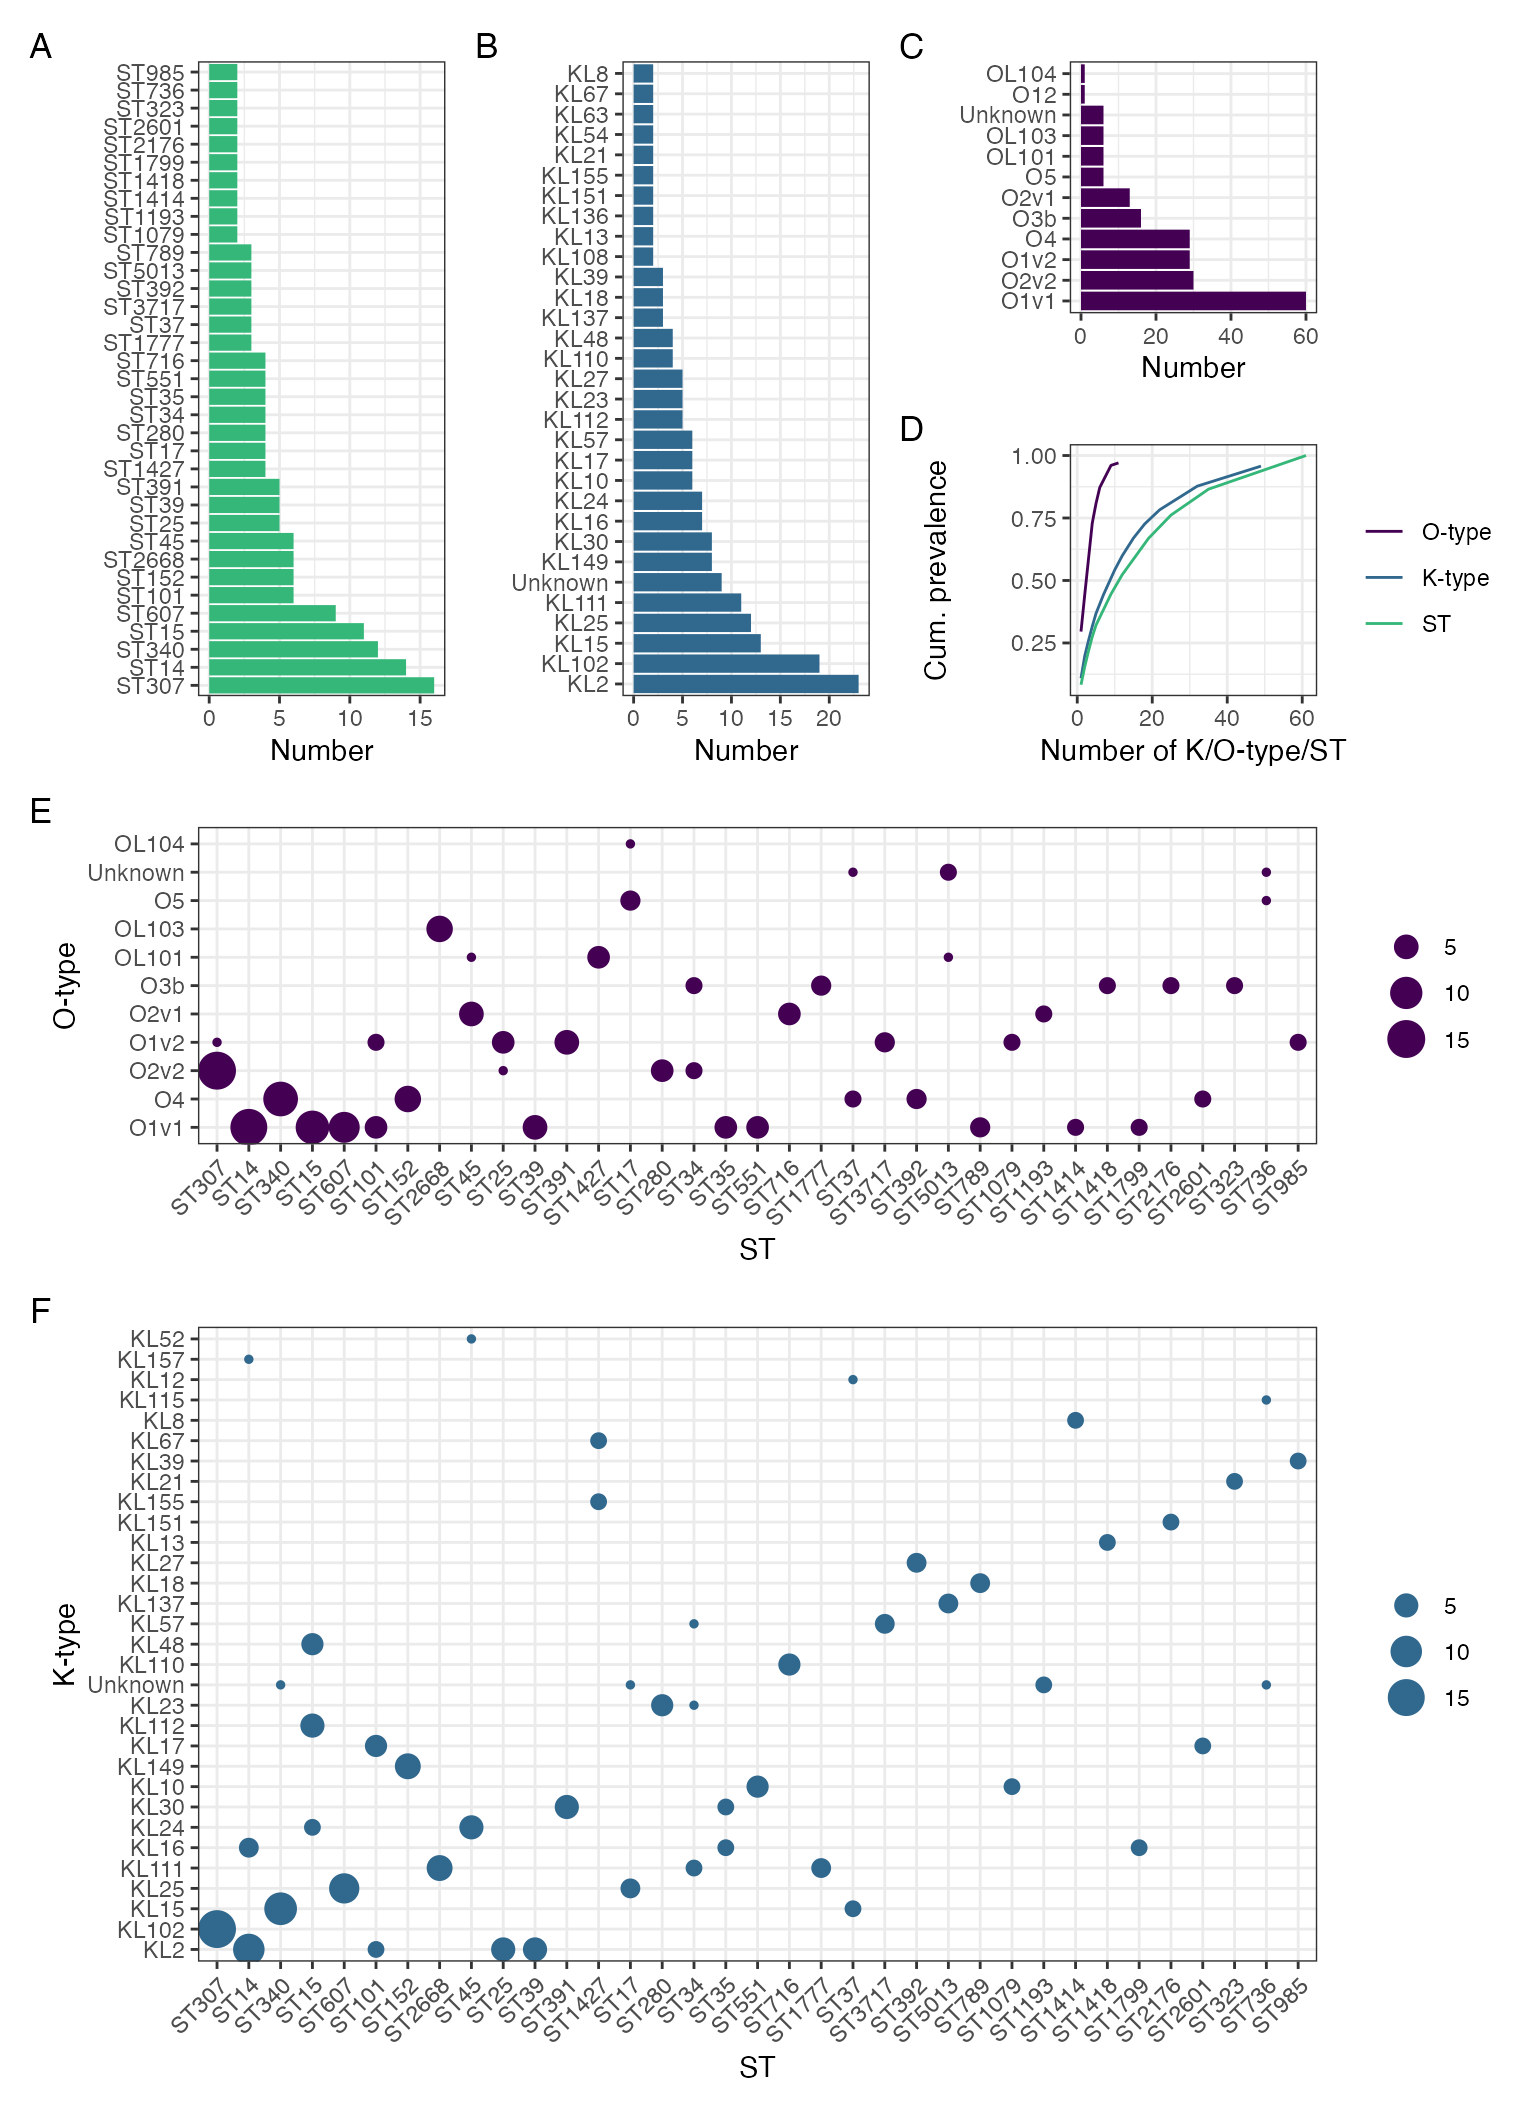 FIGURE X: Diversity of Klebsiella chromasomal sequence type (ST, A), K-type (B) and O-type (C). (D) shows cumulative prevalence for ST, K-type and O-types for all isolates in the collection as a function of the number of K-types, O-types, or STs, with each category ordered in size from largest to smallest. (E) and (F) show ST association of O-type and K-type respectively, where area of point is proportional to number of samples in the study. STs with only a single representative in the collection are excluded from plots A, B, C,E, F.